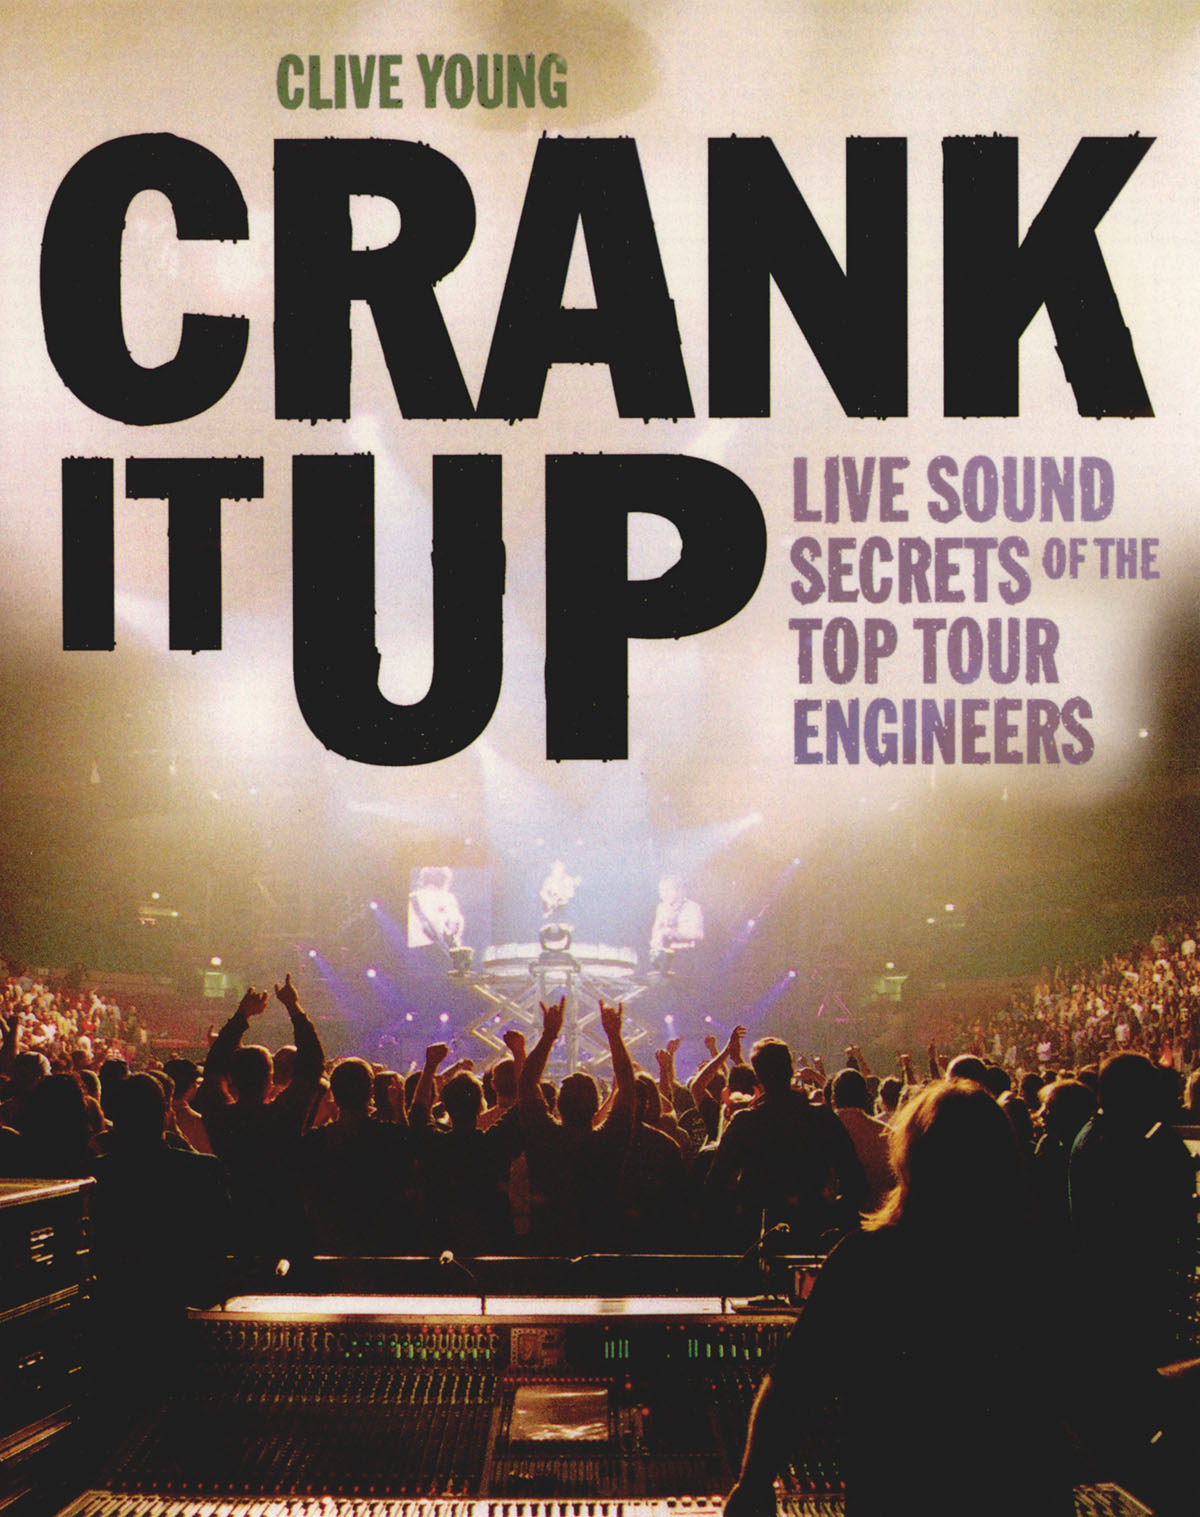 Live Sound Secrets Of The Top Tour Engineers: Reference Books